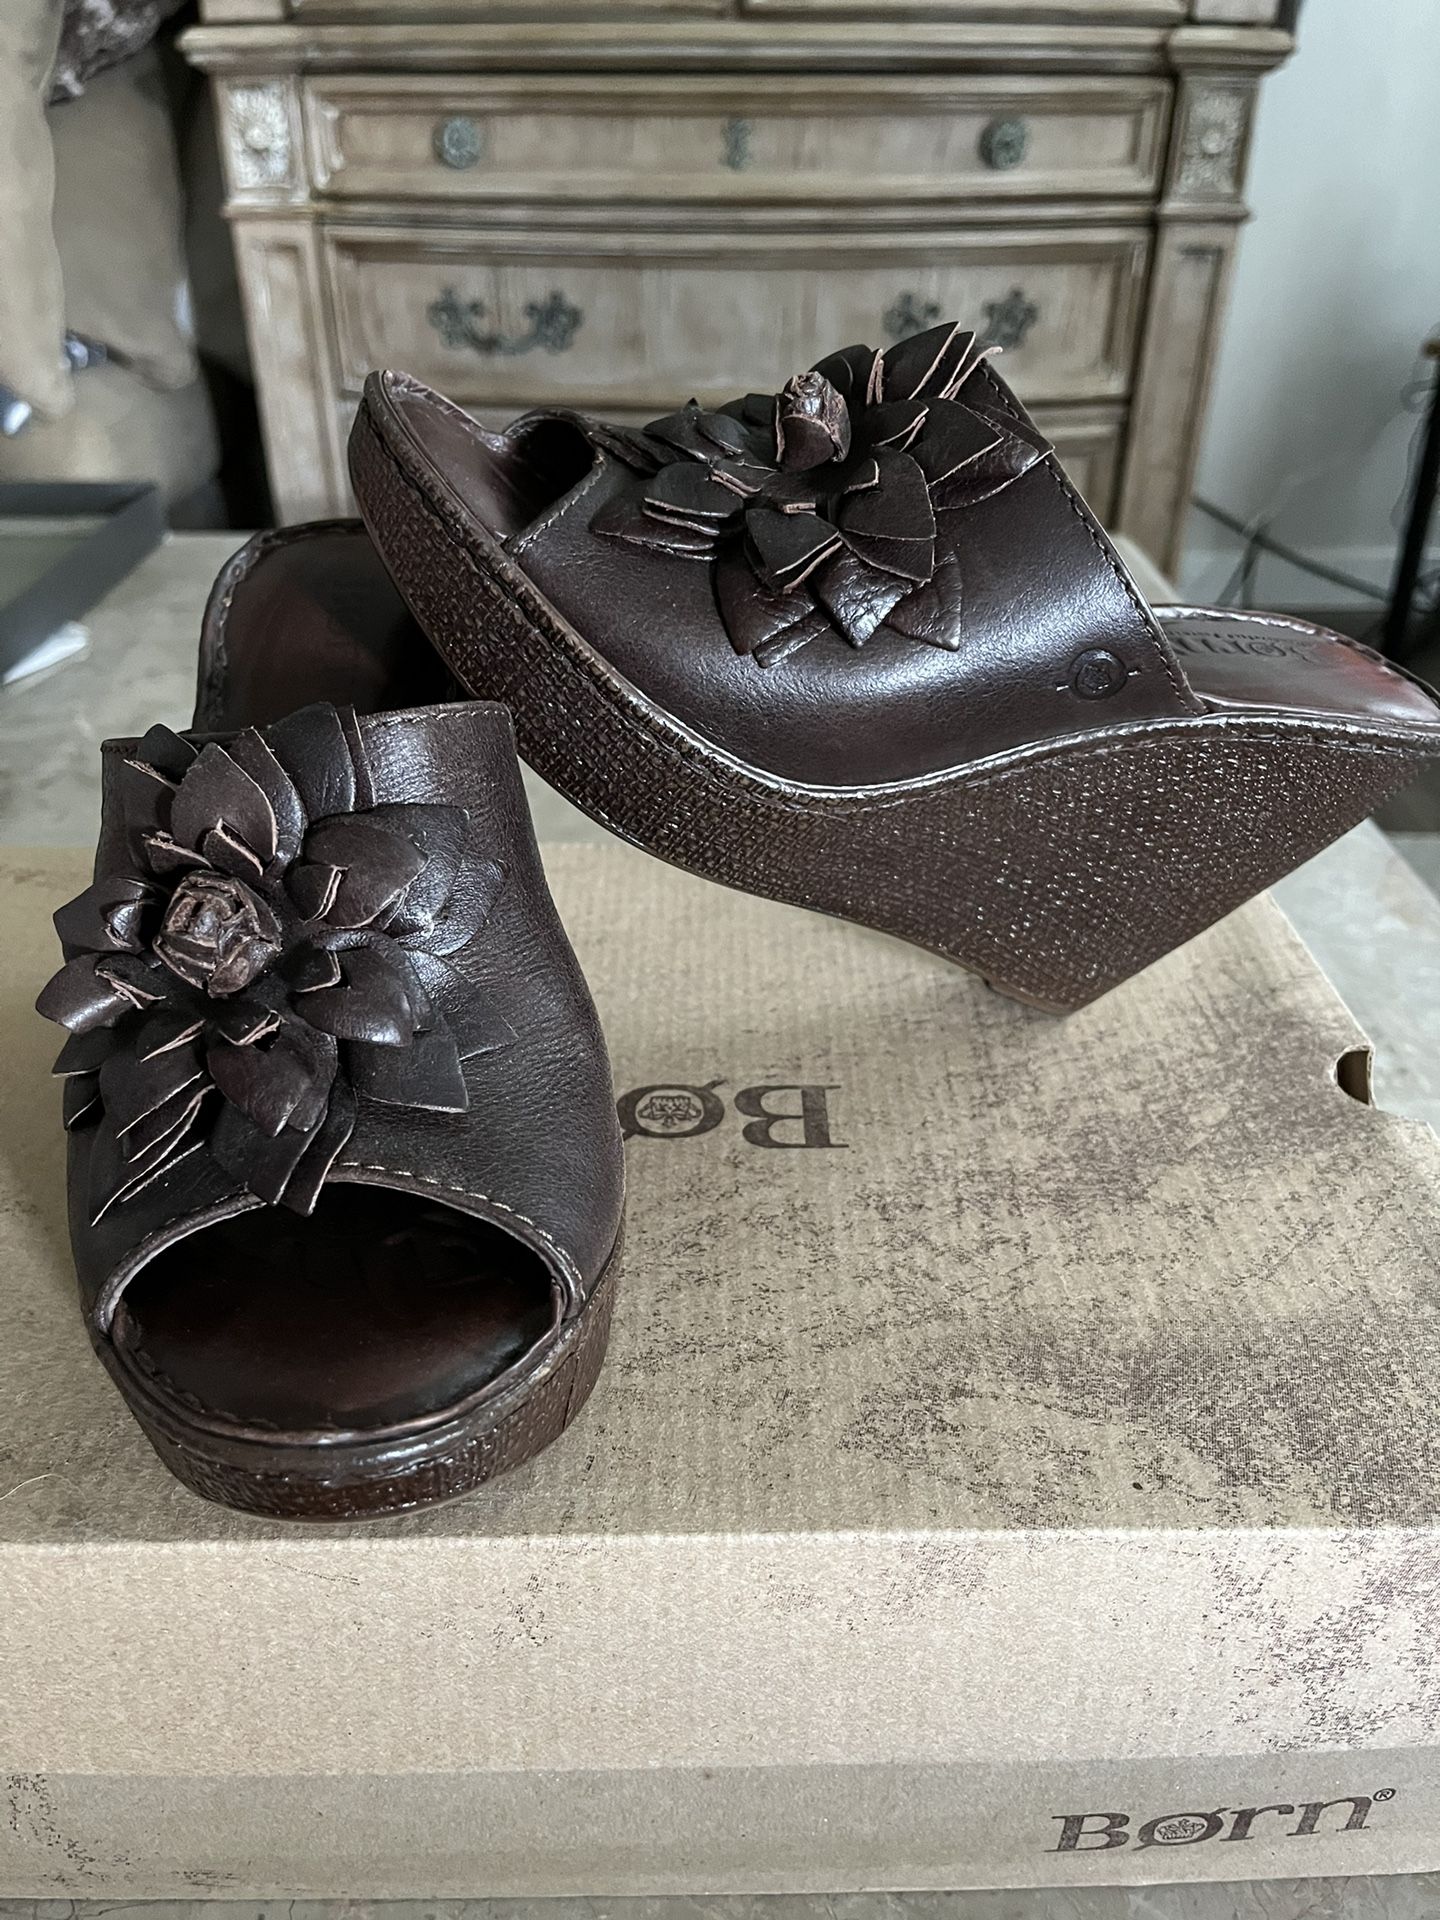 BORN Women’s Dark Brown Wedge Sandals w/Layered Leather Flower 🌺 , Size 7 / Euro 38 from Macy’s 